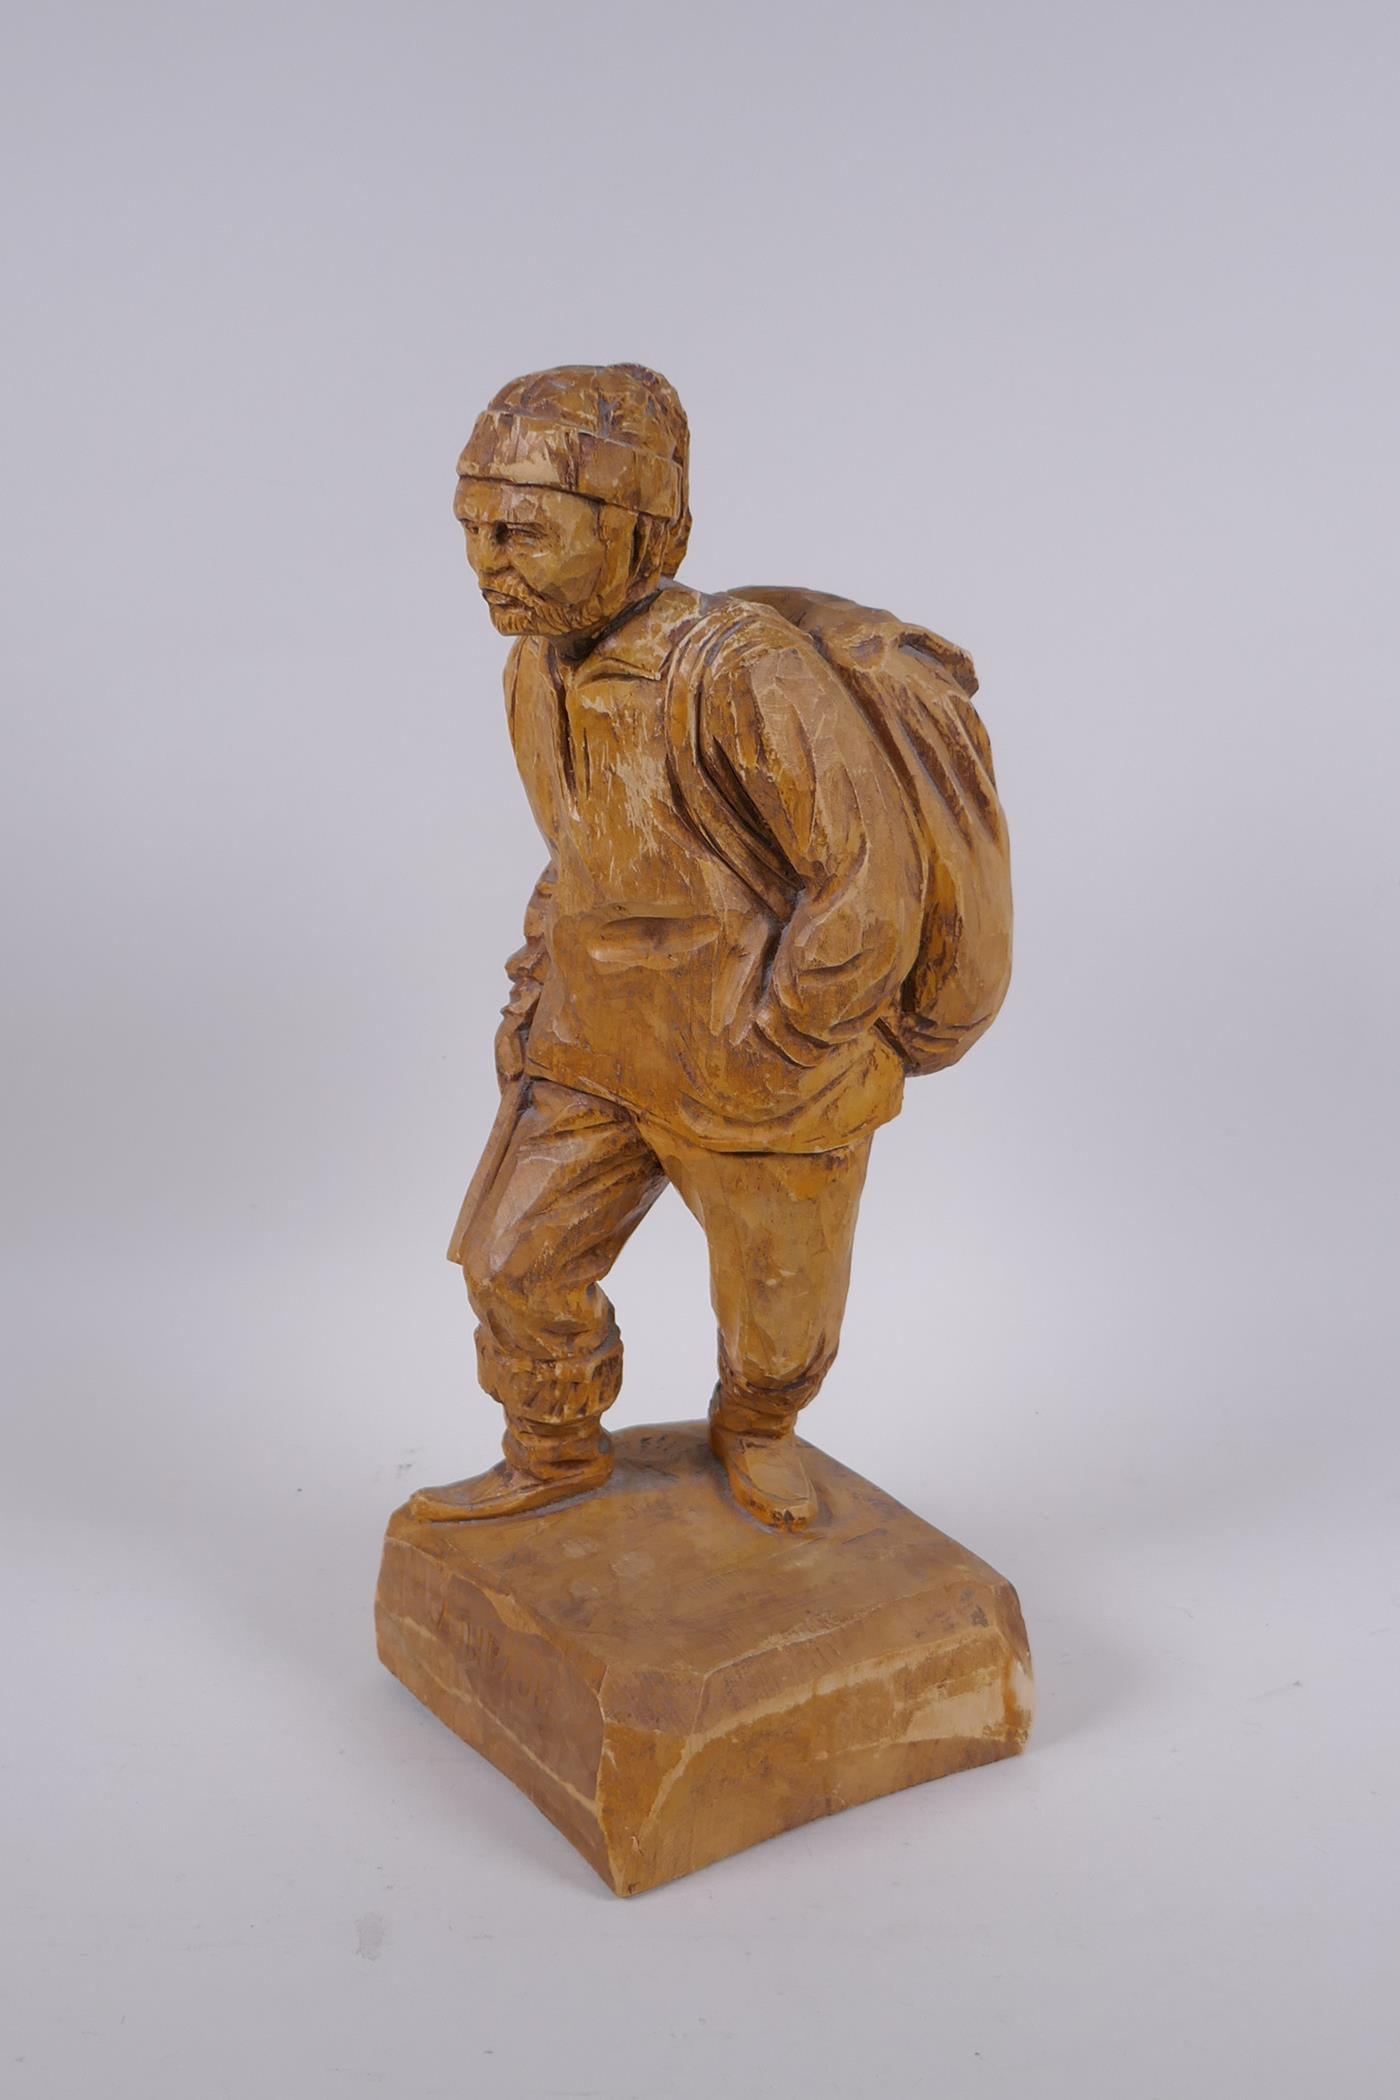 Adalbert Thibault, (Canadian), mid C20th wood carving of a hunter, 35cm high - Image 2 of 4